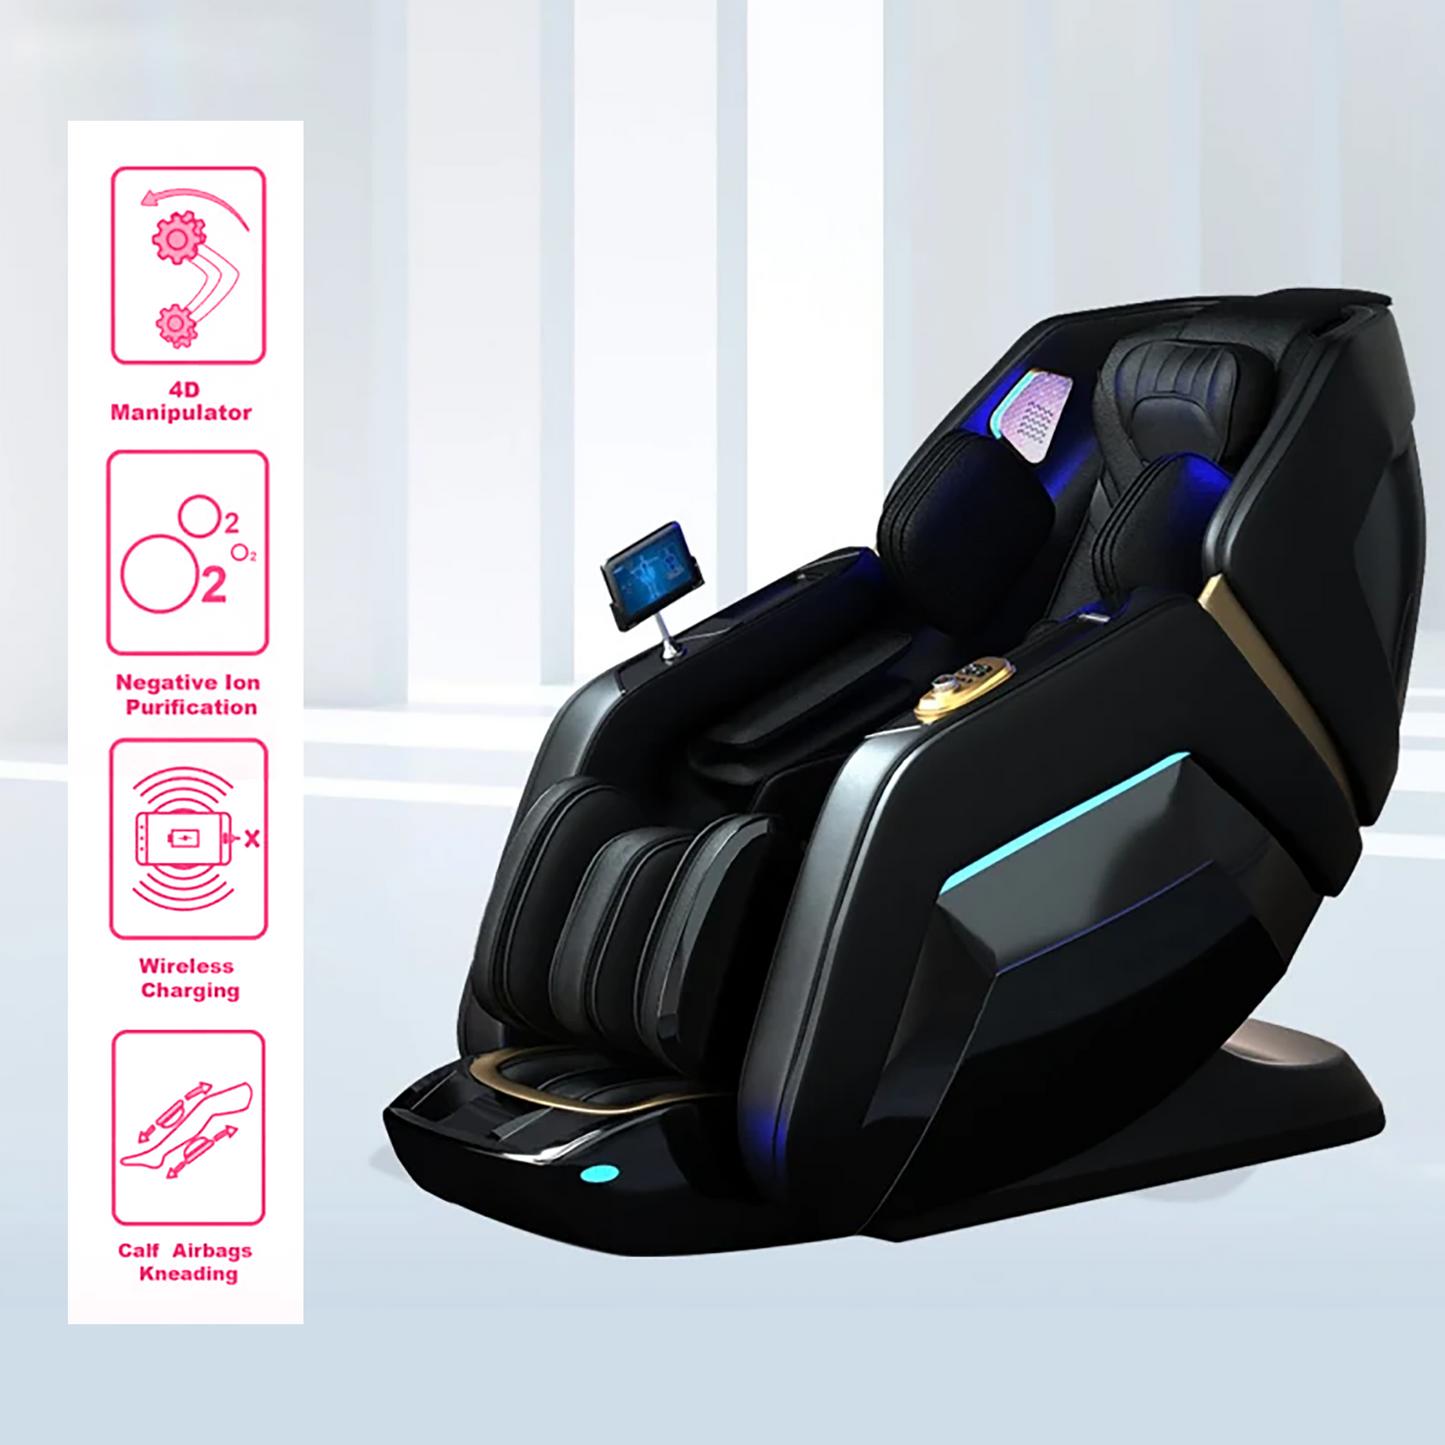 ElitePro Massage Chair with Heat Therapy, Full Body Massage, Health scan, touch control and Bluetooth Speaker